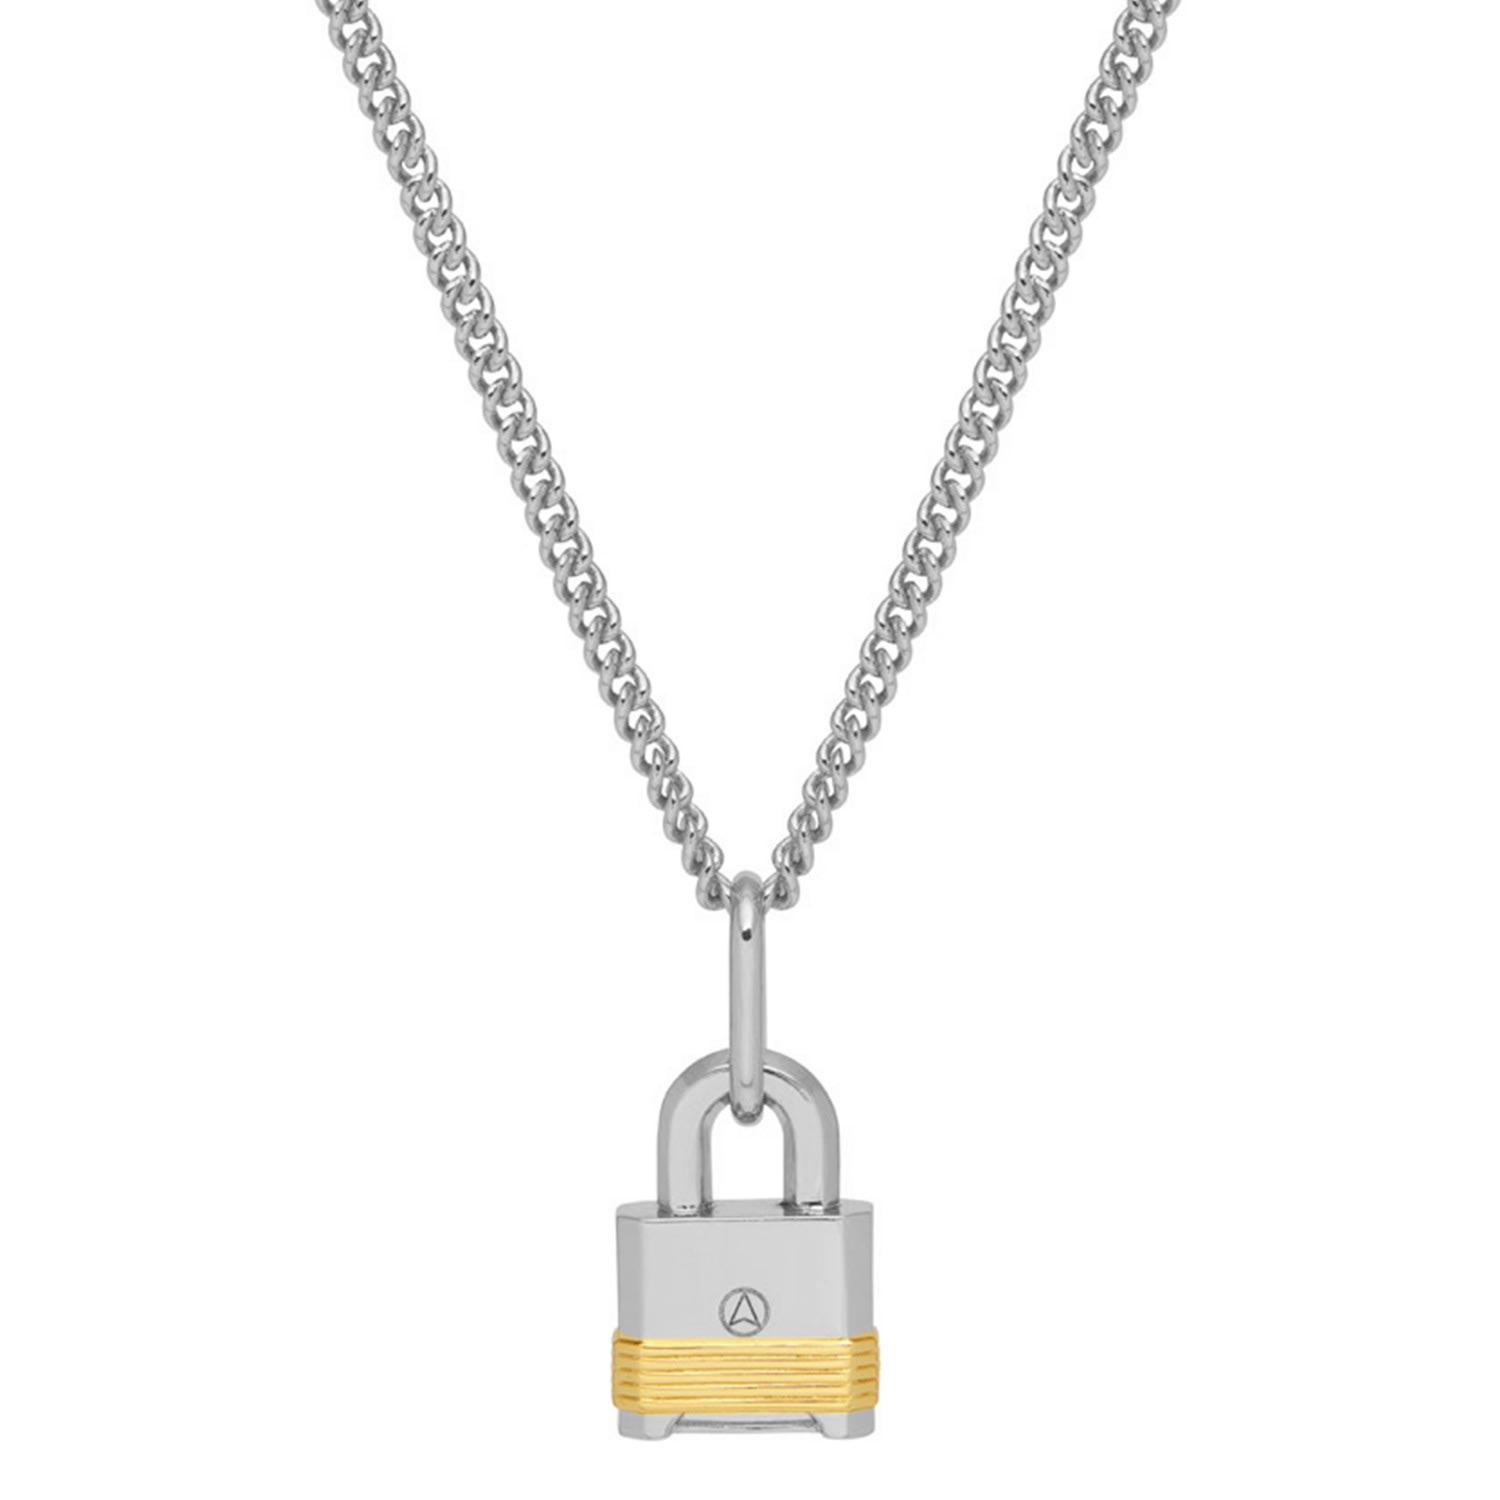 Northskull Men's Silver Lock Necklace In Two Tones